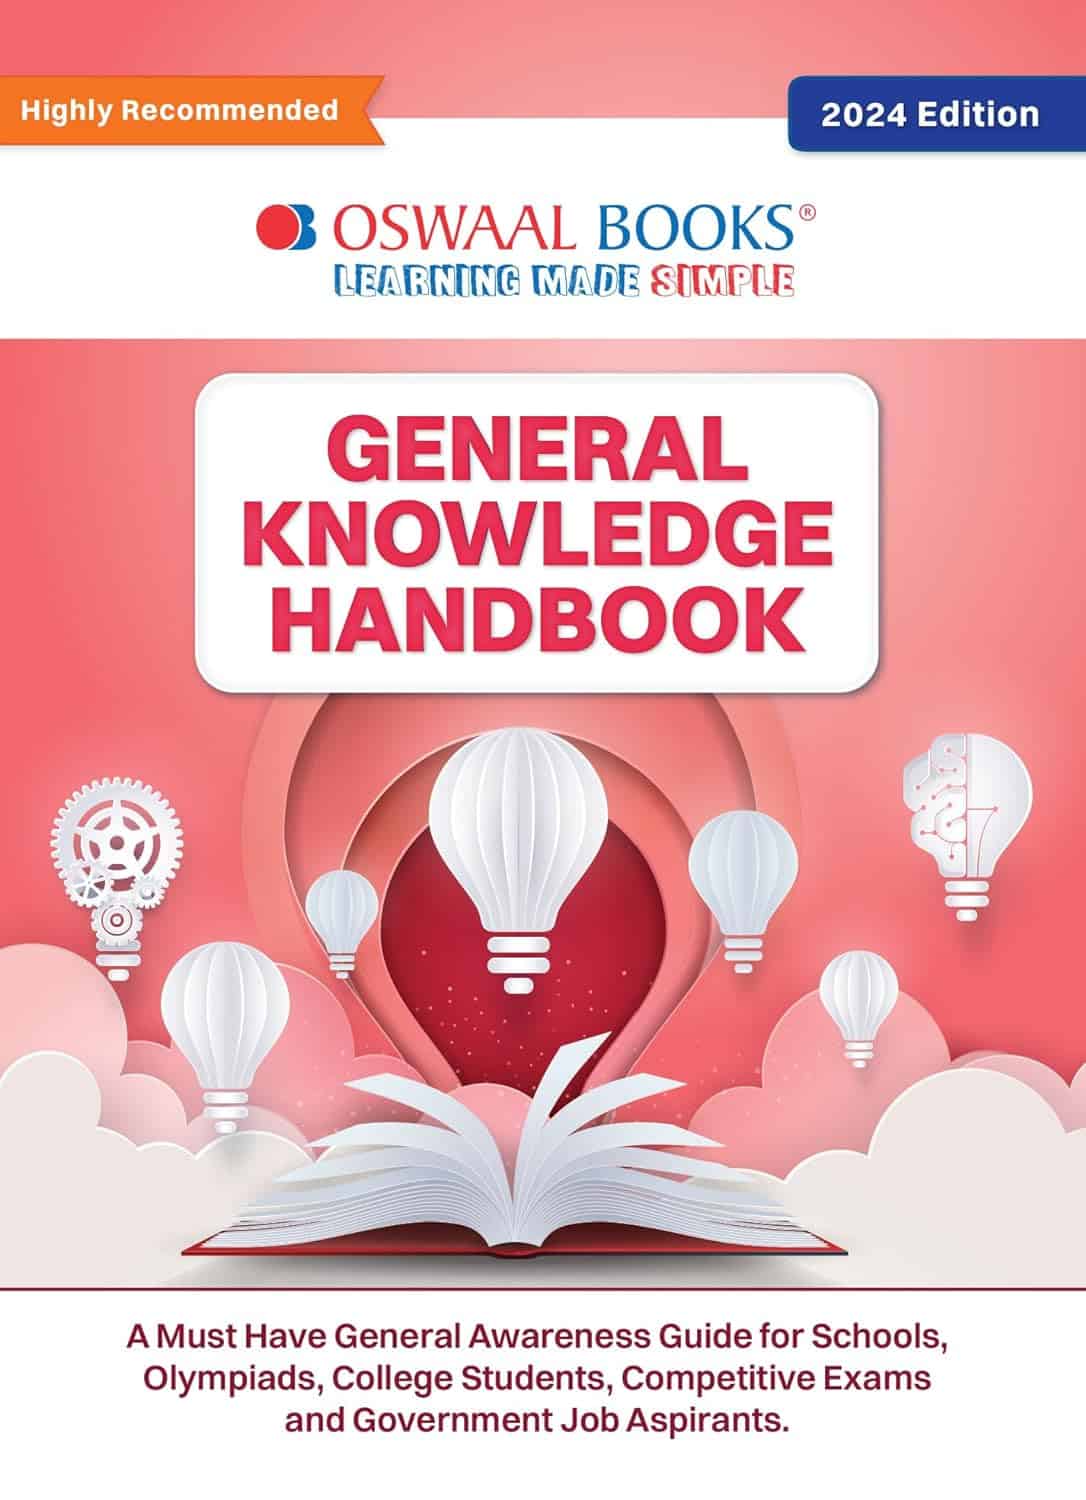 Oswaal General Knowledge Handbook (For 2024 exam) - GK - School, Olympiads - UPSC, State PSC, SSC, Bank PO, Clerk, BBA, MBA, RRB, NDA, CDS, CAPF, EPFO, NRA CET, CLAT, Govt Jobs